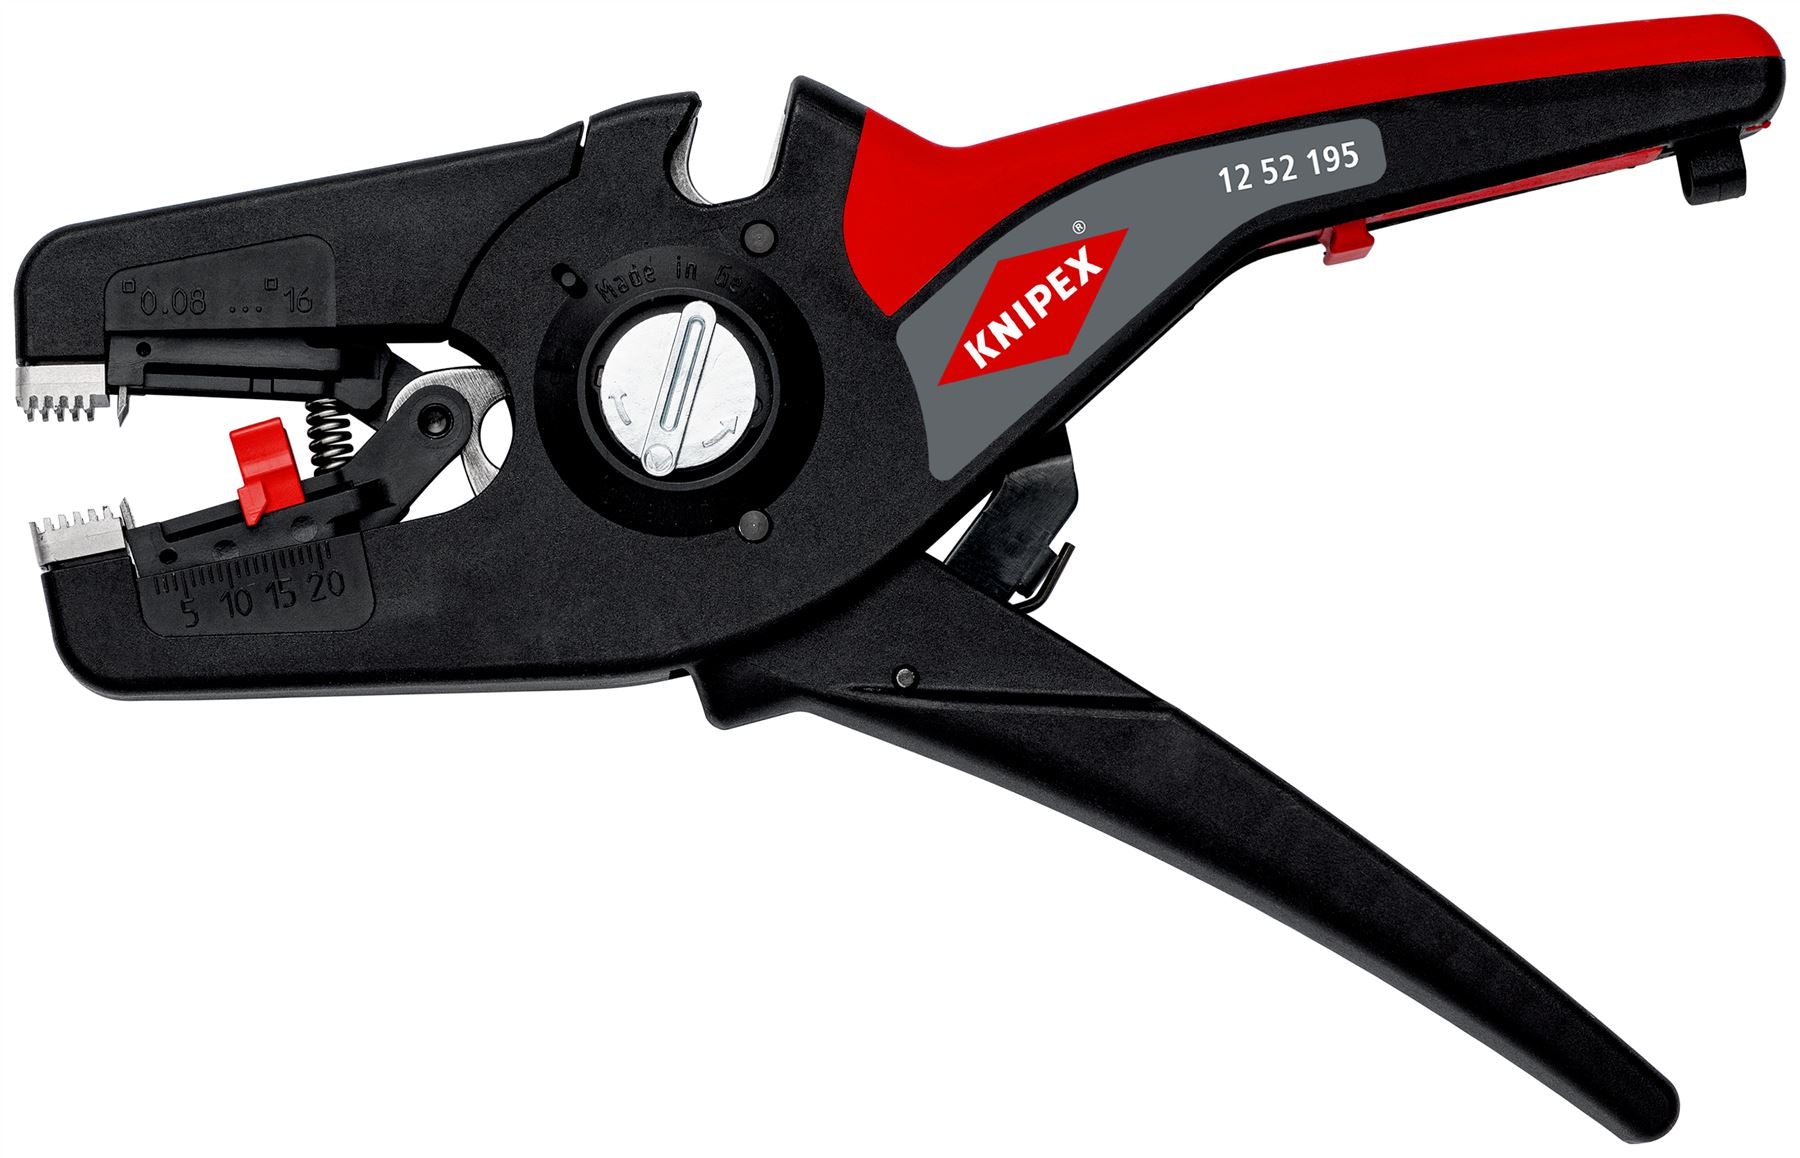 Knipex PreciStrip 16 Automatic Insulation Stripper 195mm Wire Stripping Pliers 12 52 195